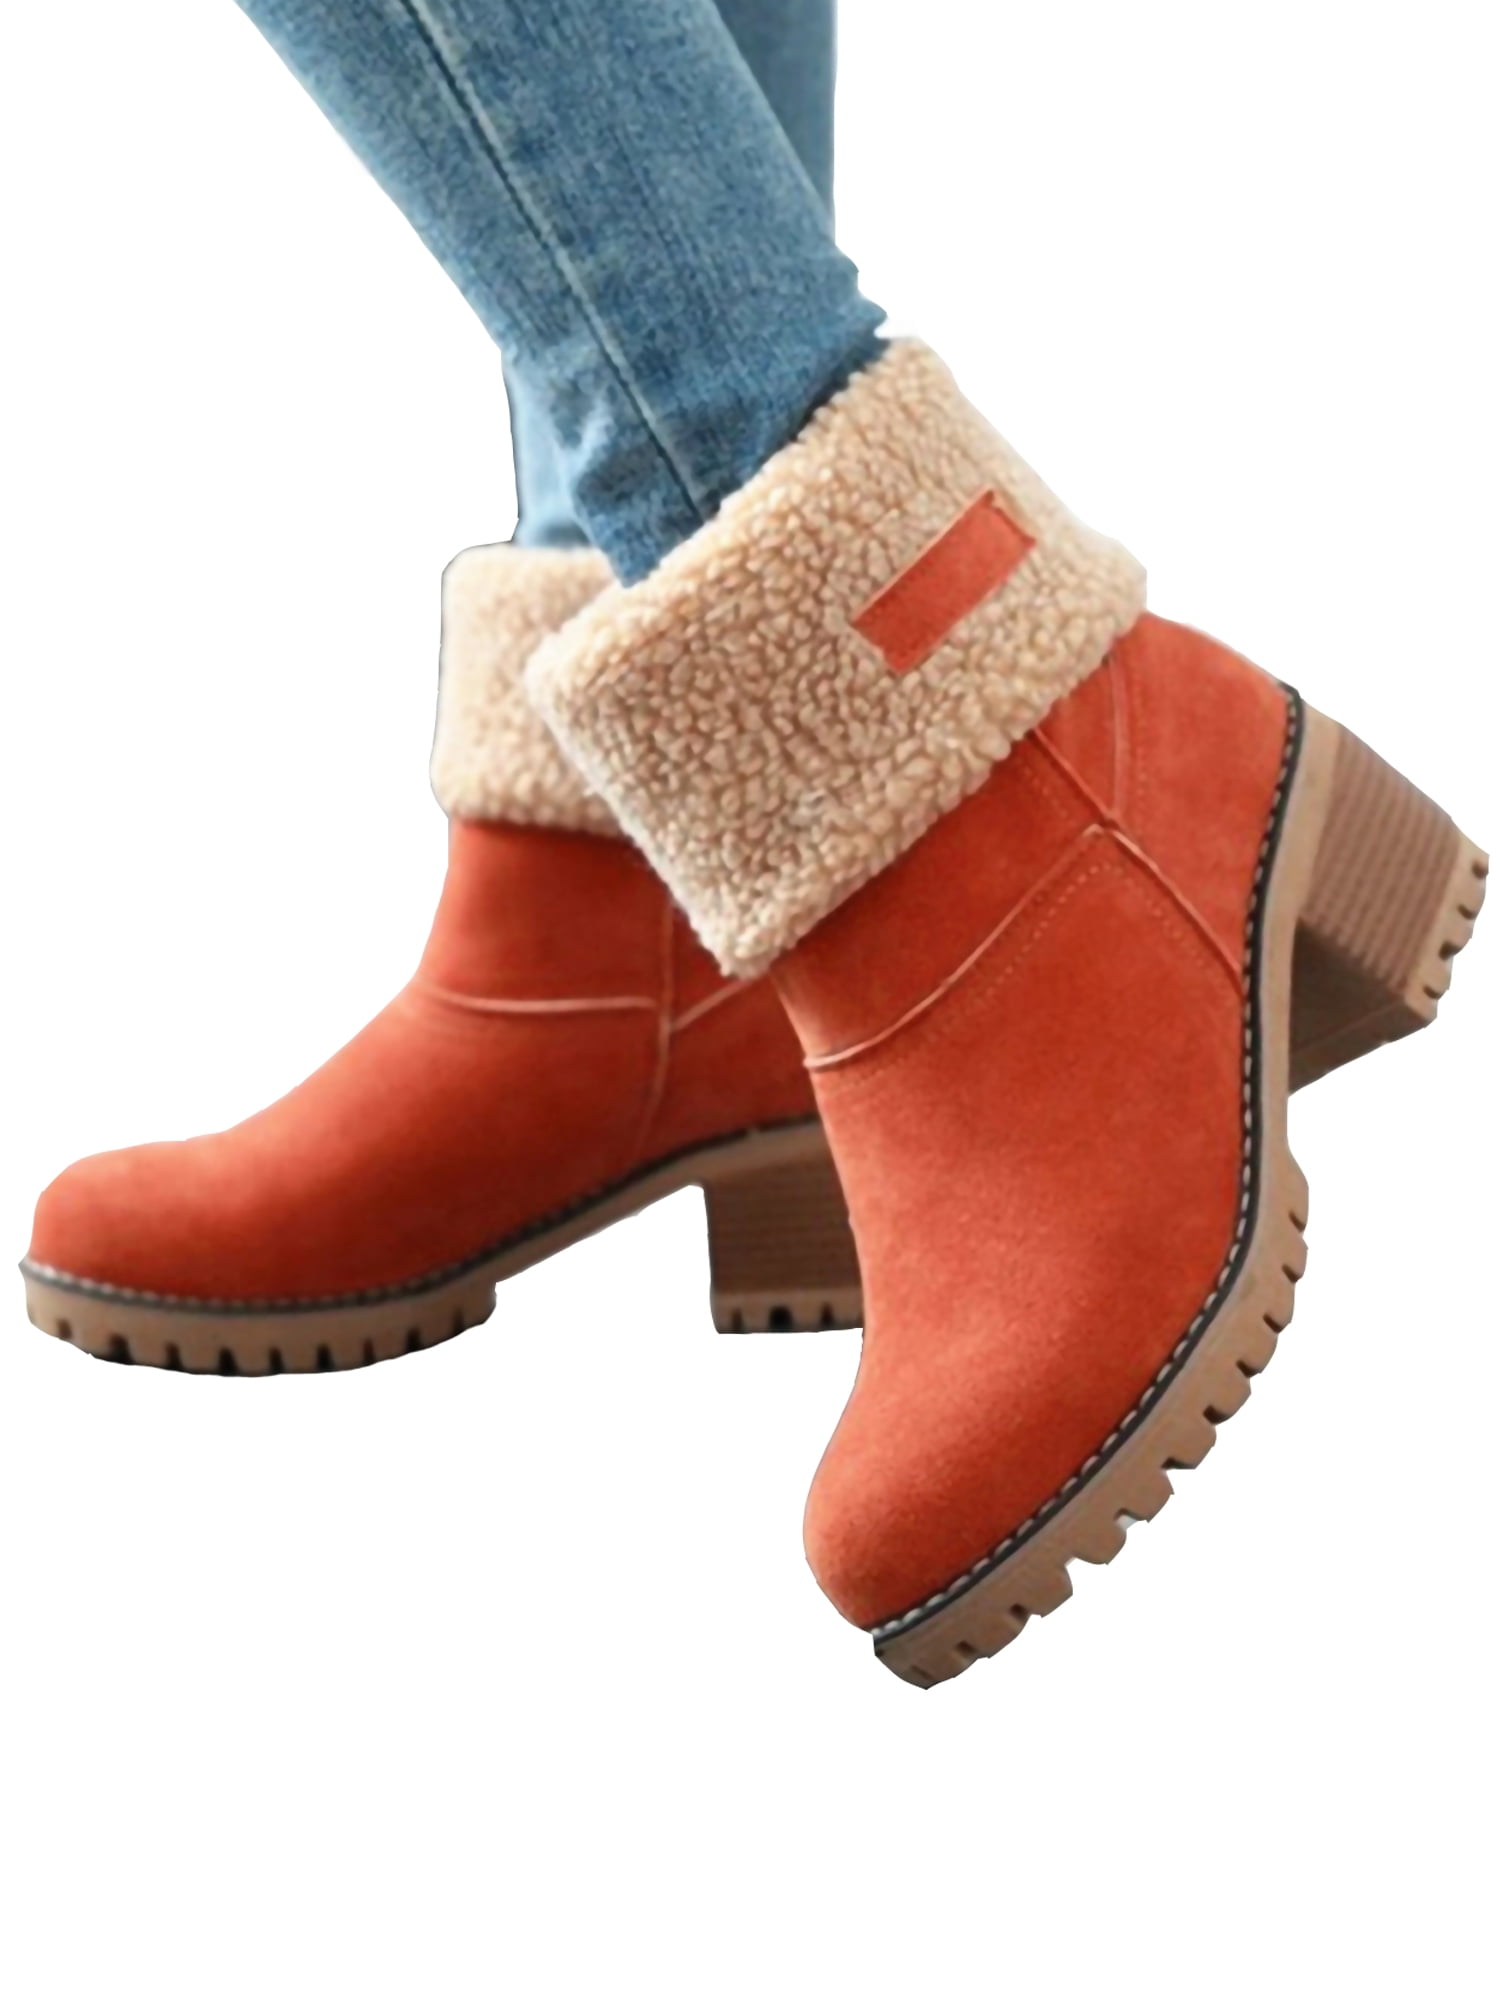 Womens Winter Mid-Calf Snow Boots Warm Lace UP Chunky Block Heel Round Toe Fur Outdoor Fashion Riding Ankle Boots 